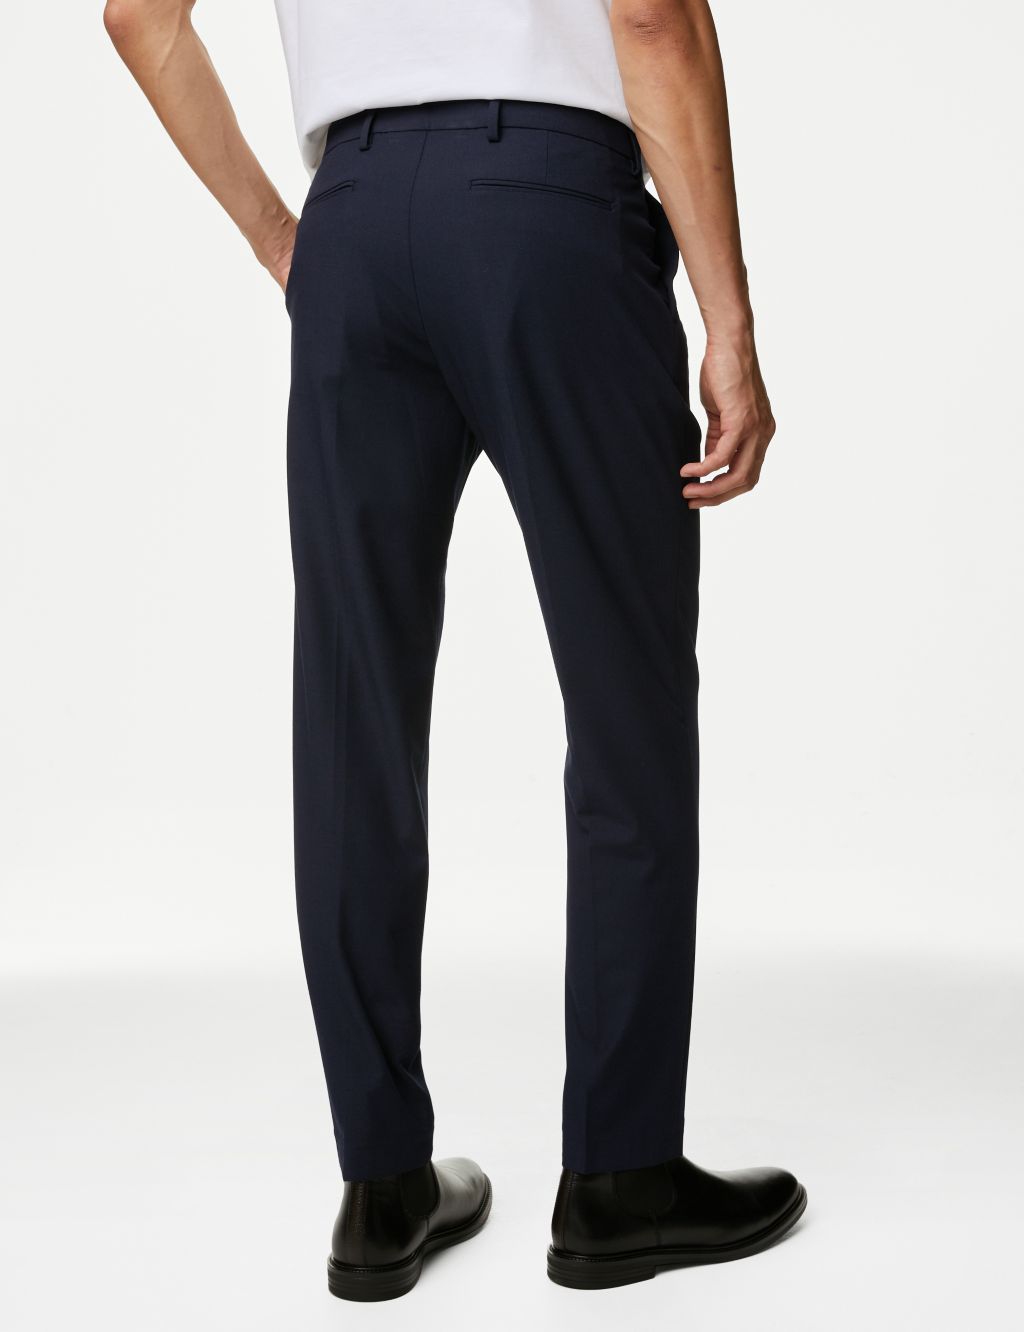 Twin Pleat Stretch Trousers image 4